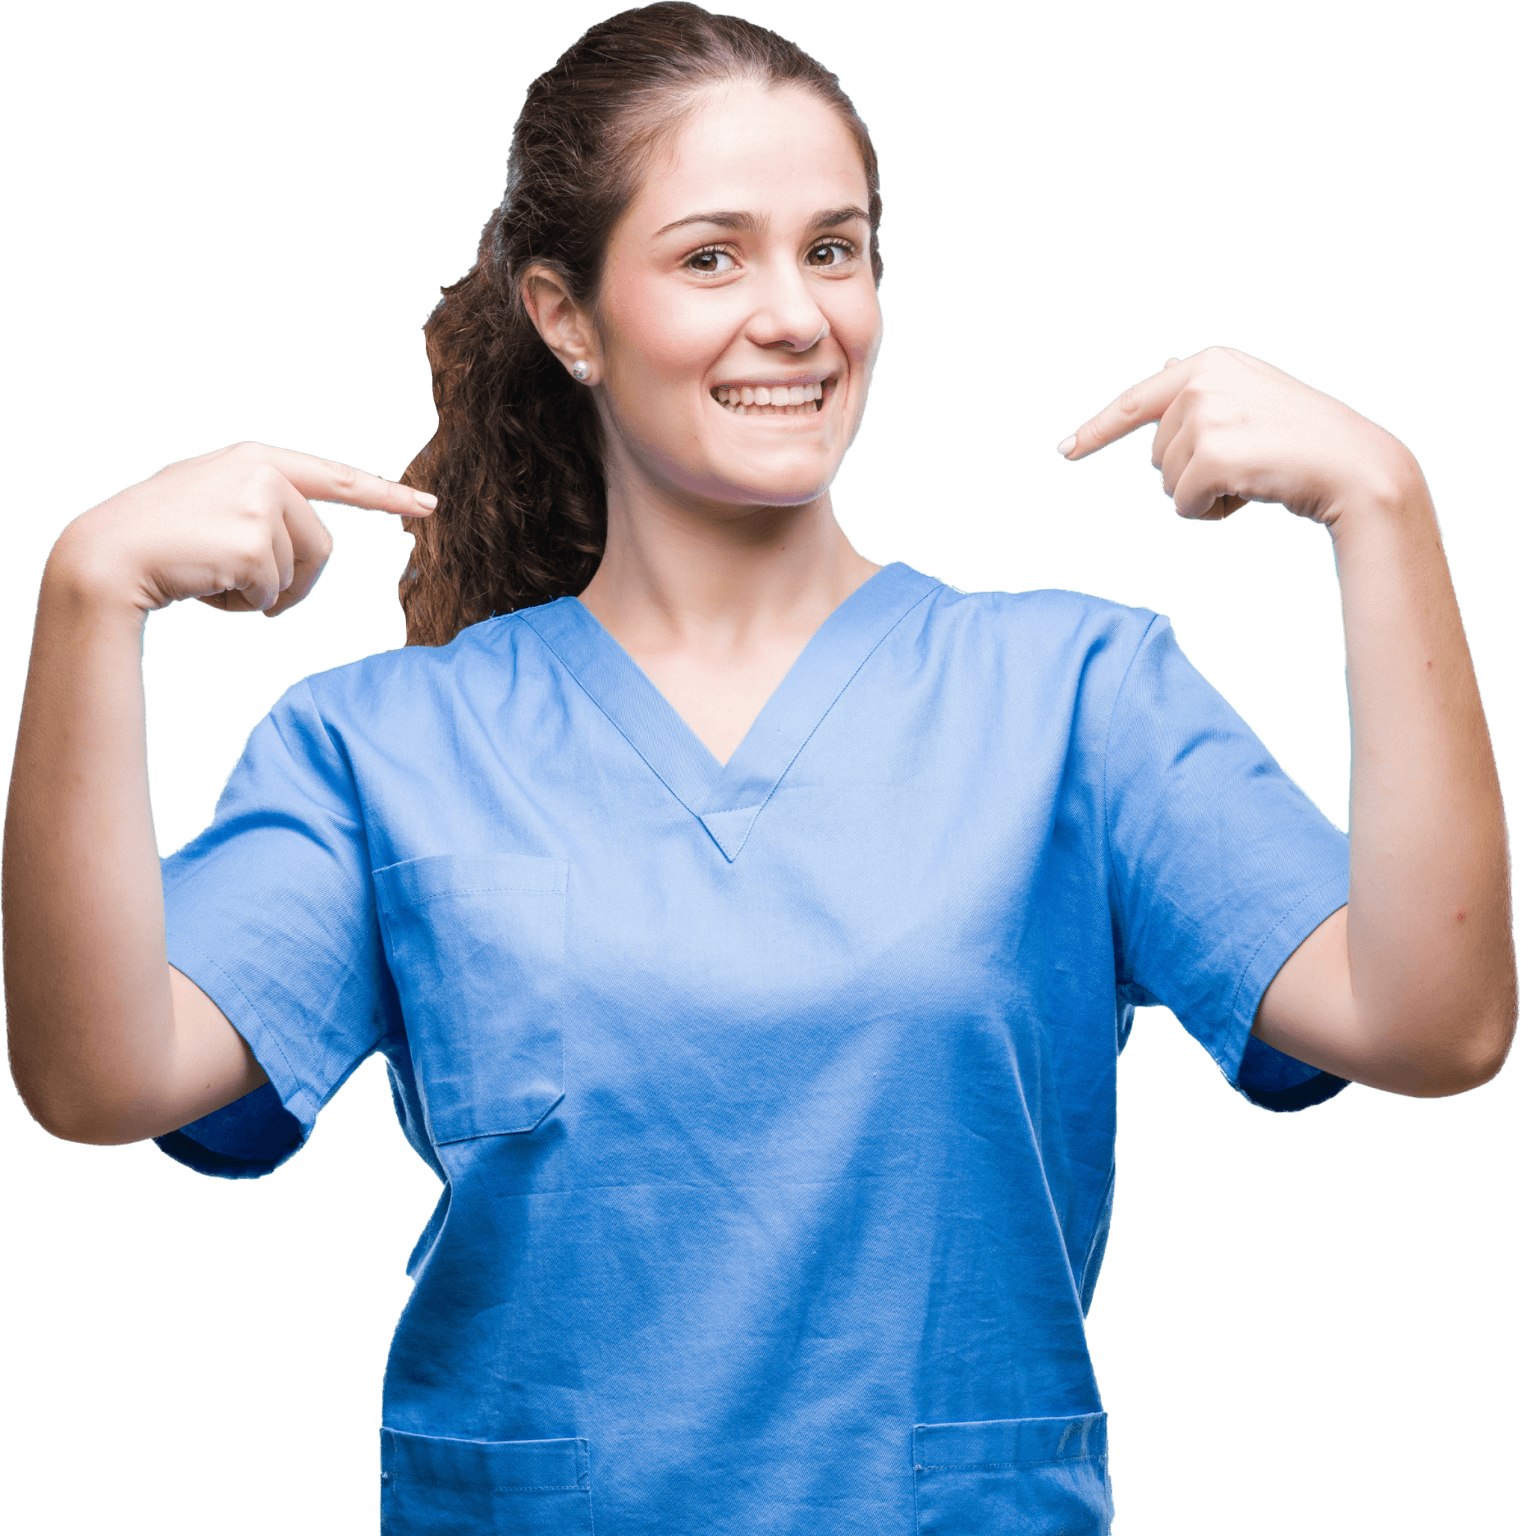 A woman in scrubs points to herself